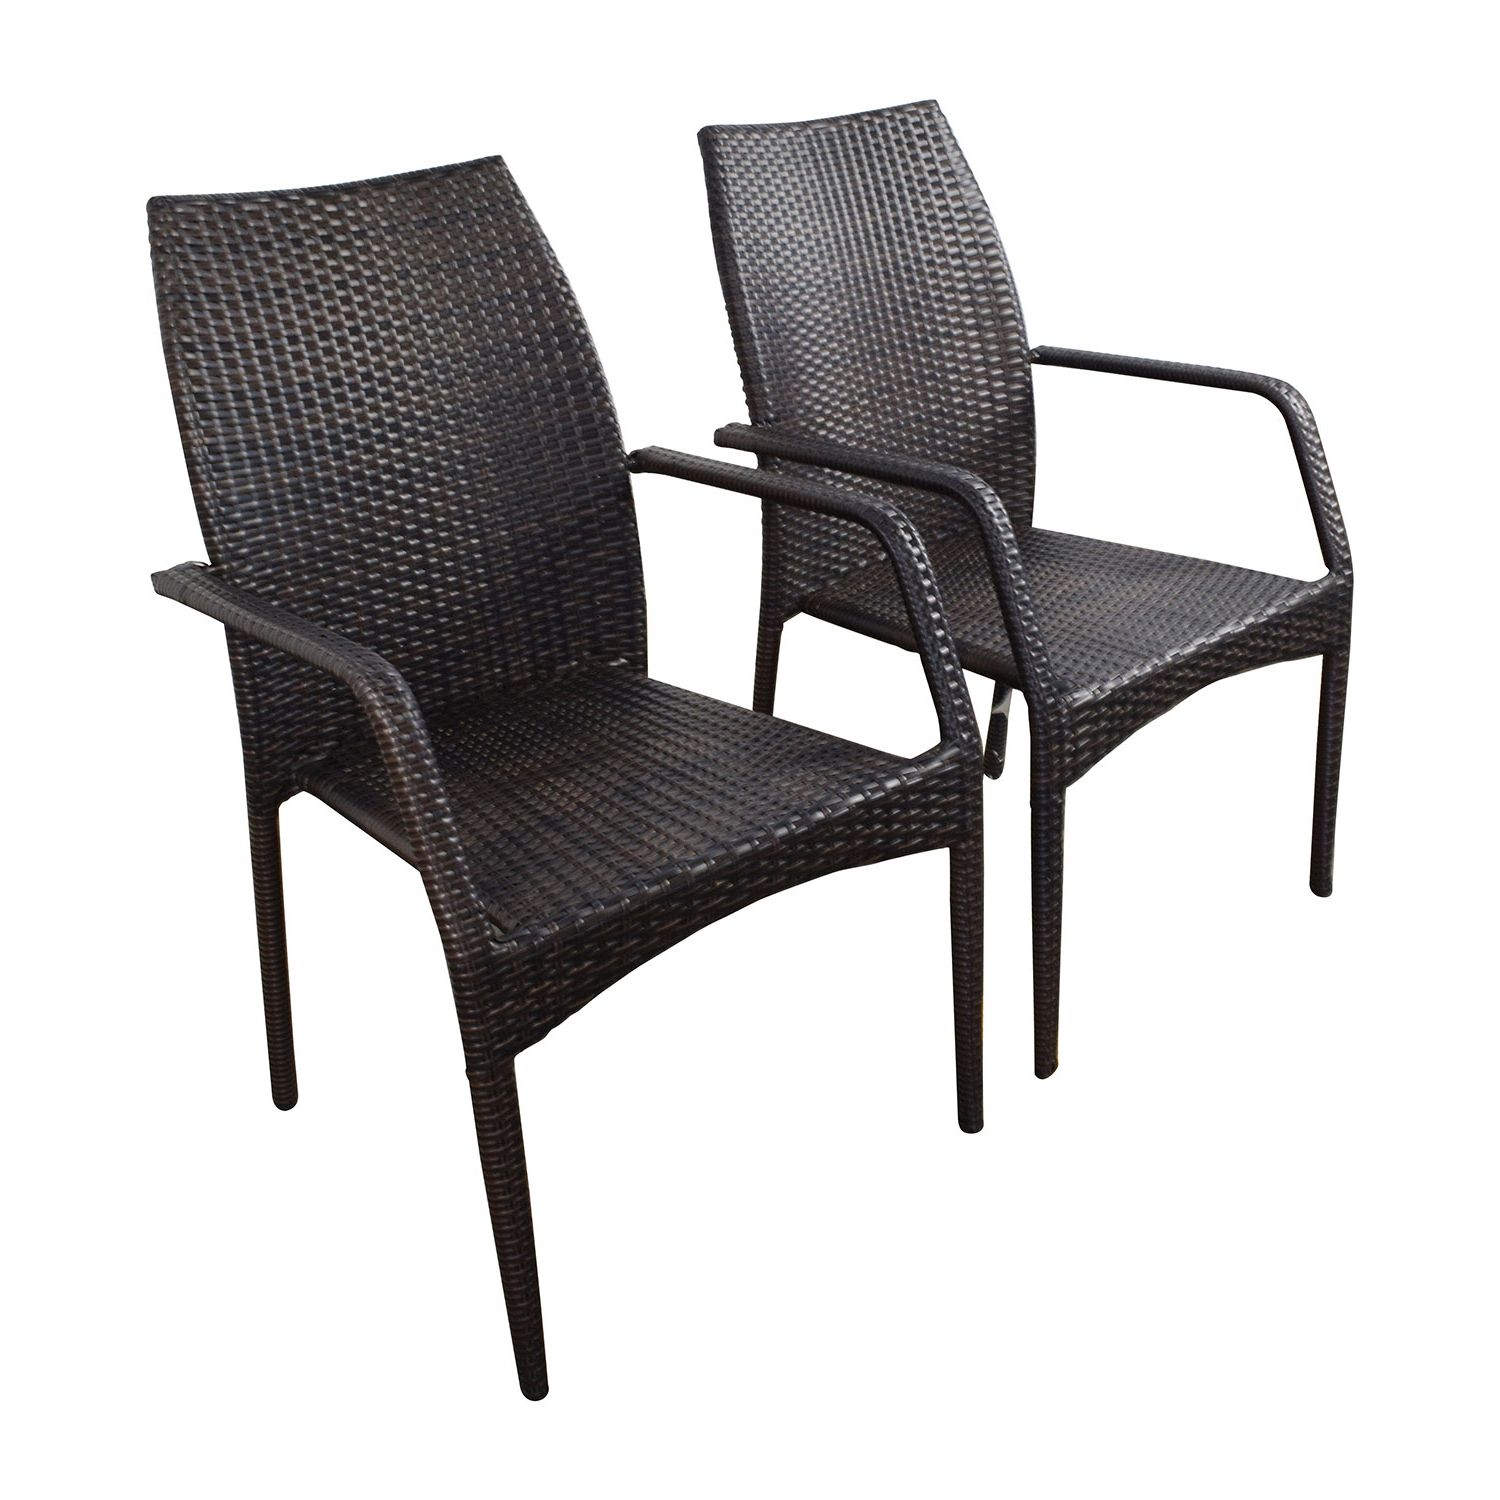 [%85% Off – Dark Brown Wicker Outdoor Dining Chairs / Chairs Pertaining To Most Popular Dark Brown Wood Outdoor Chairs|dark Brown Wood Outdoor Chairs For 2020 85% Off – Dark Brown Wicker Outdoor Dining Chairs / Chairs|most Popular Dark Brown Wood Outdoor Chairs Pertaining To 85% Off – Dark Brown Wicker Outdoor Dining Chairs / Chairs|recent 85% Off – Dark Brown Wicker Outdoor Dining Chairs / Chairs For Dark Brown Wood Outdoor Chairs%] (View 2 of 15)